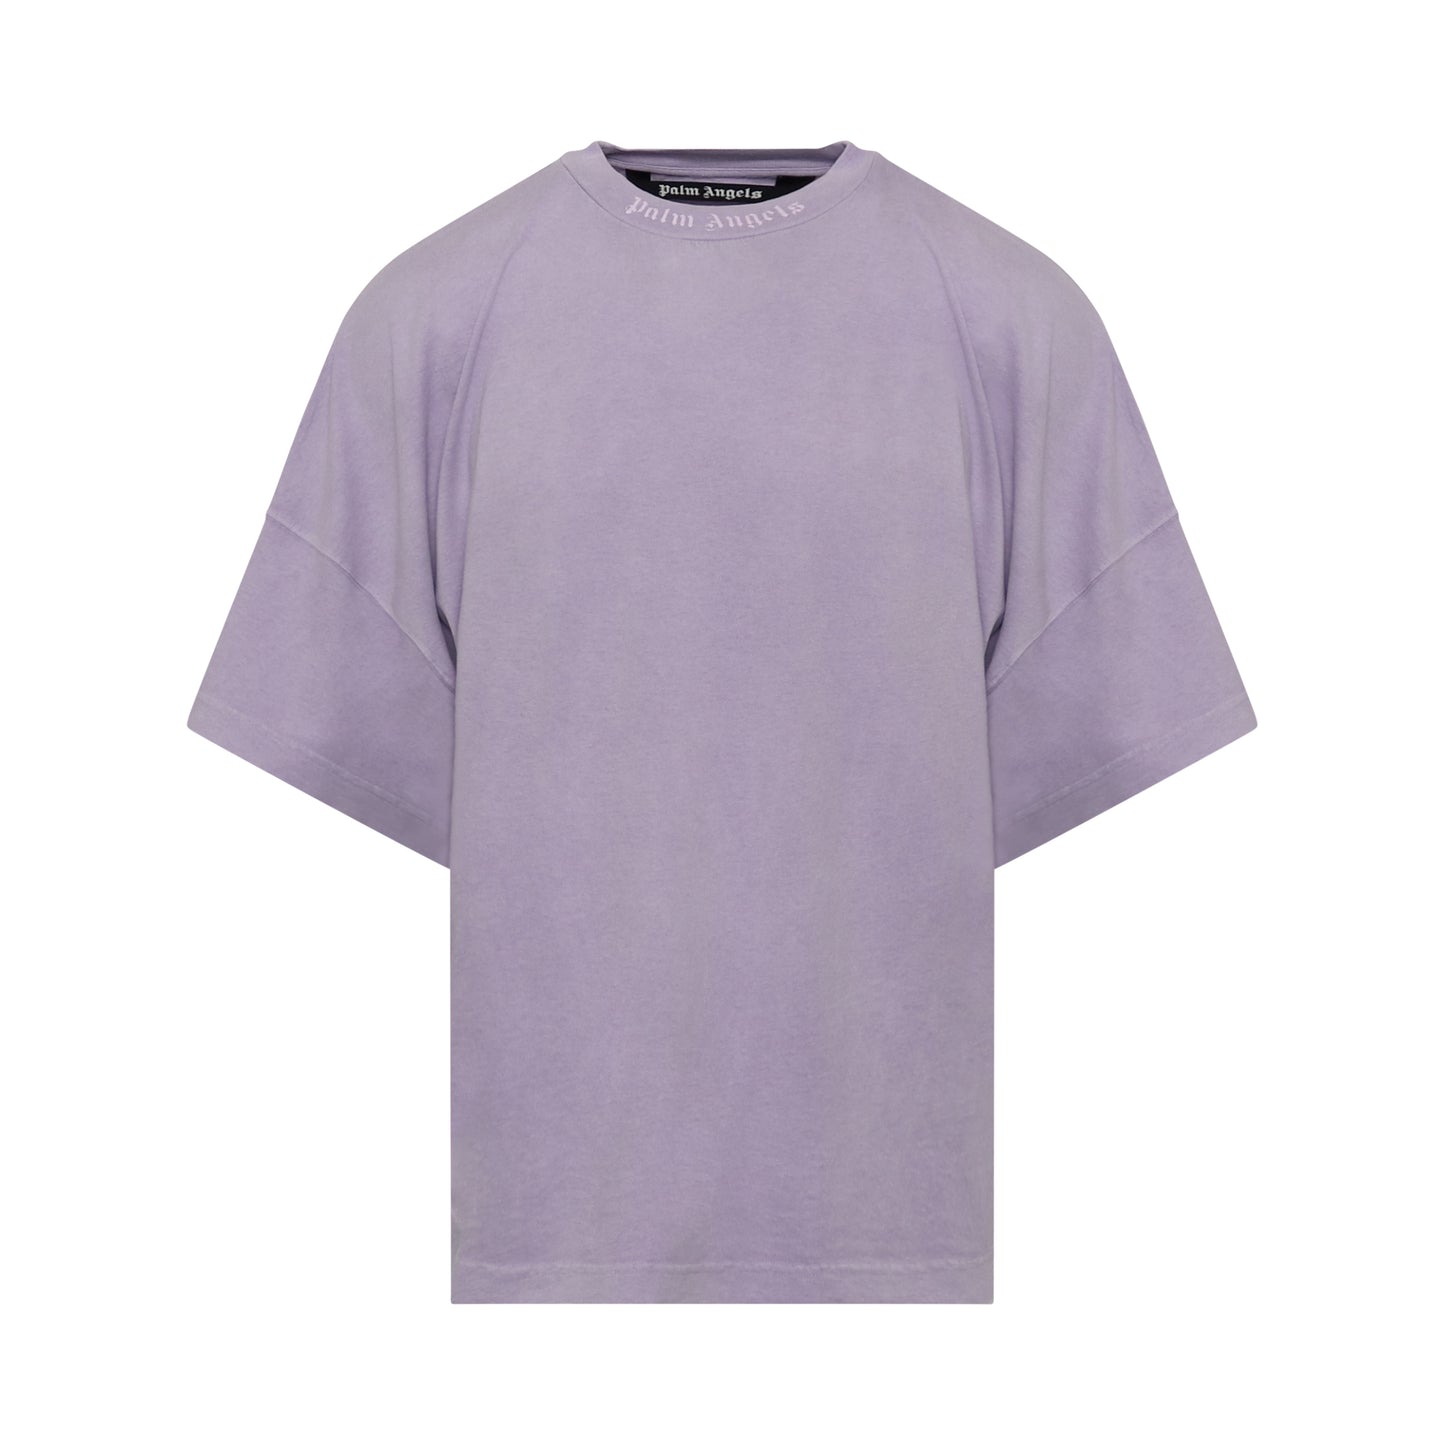 Gd Classic Logo Oversize T-Shirt in Lilac